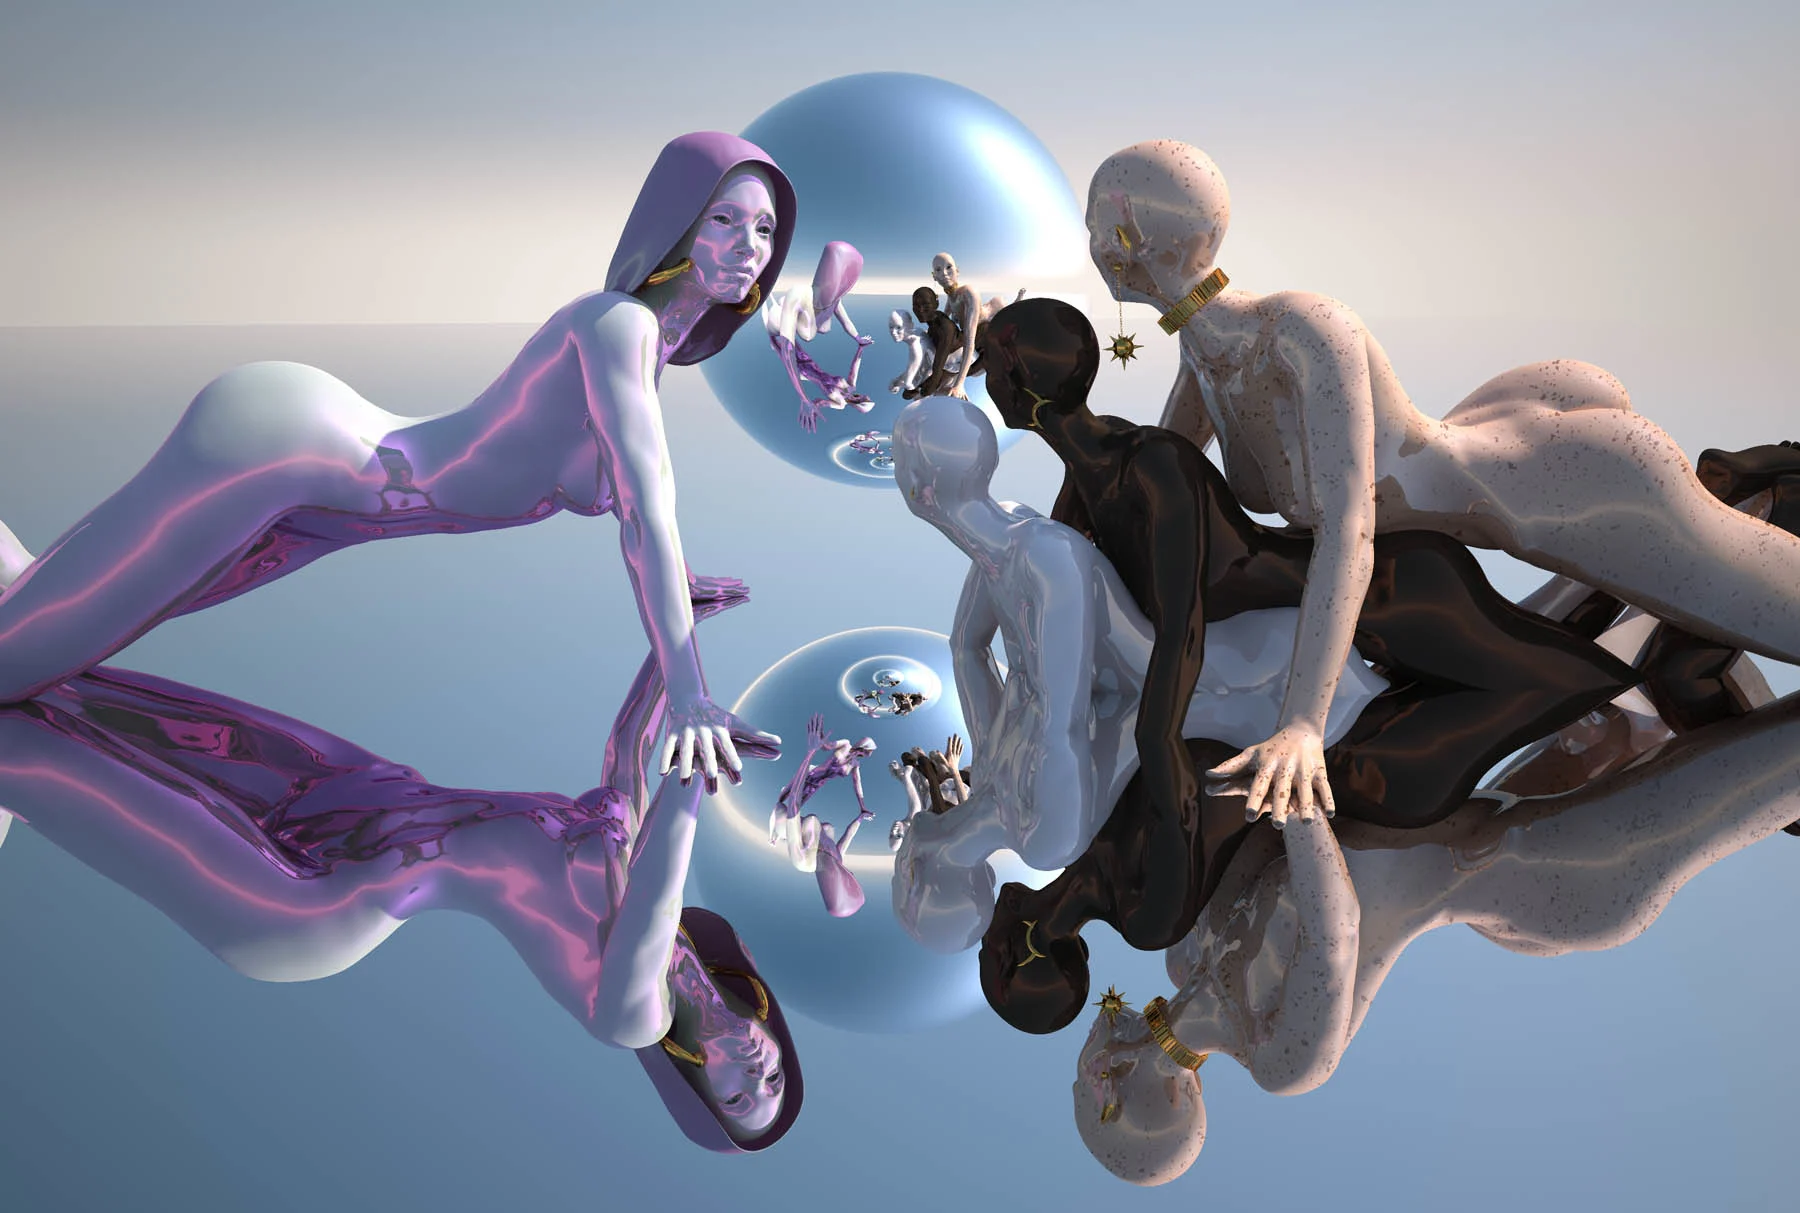 Four computer-generated female figures lie on an infinite mirror; three women on the right are stacked on top of one another like sphinxes, blending into the mirror with different skin tones. The fourth figure appears strong and patient. A sphere in the background reflects the entire scene.